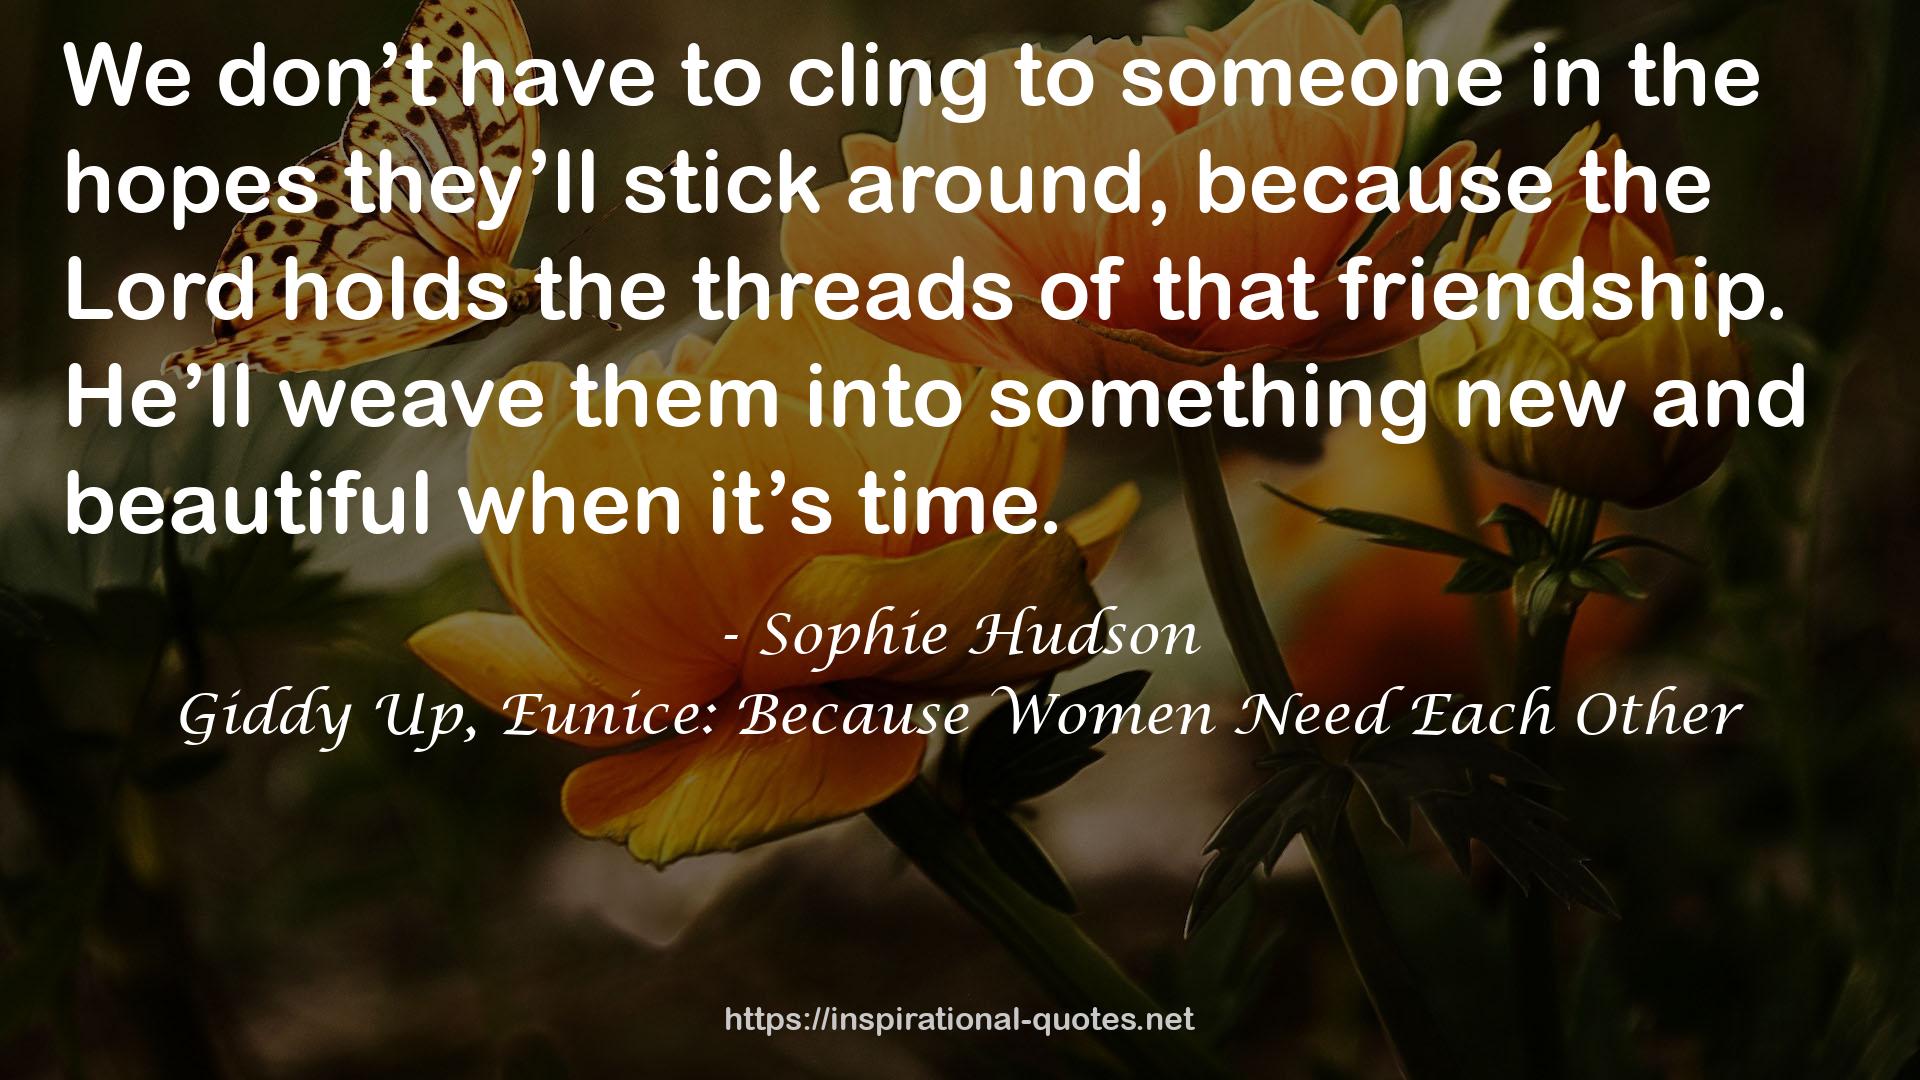 Giddy Up, Eunice: Because Women Need Each Other QUOTES